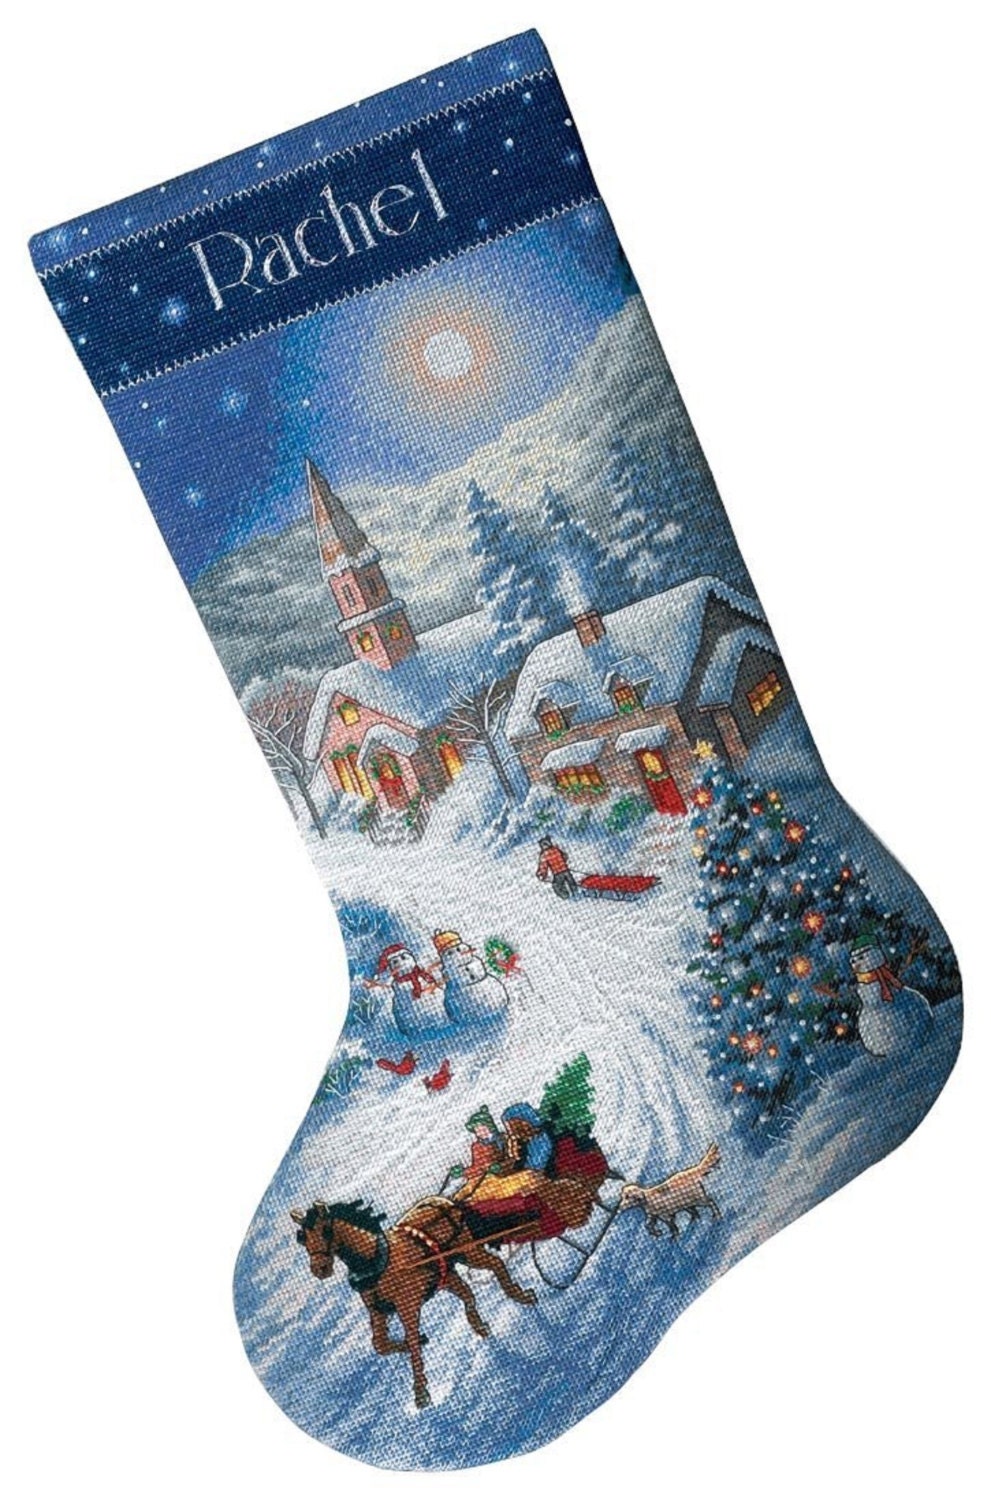 Counted Cross Stitch Christmas Stocking Sleigh Ride At Dusk Dimensions Kit -Free Us Shipping